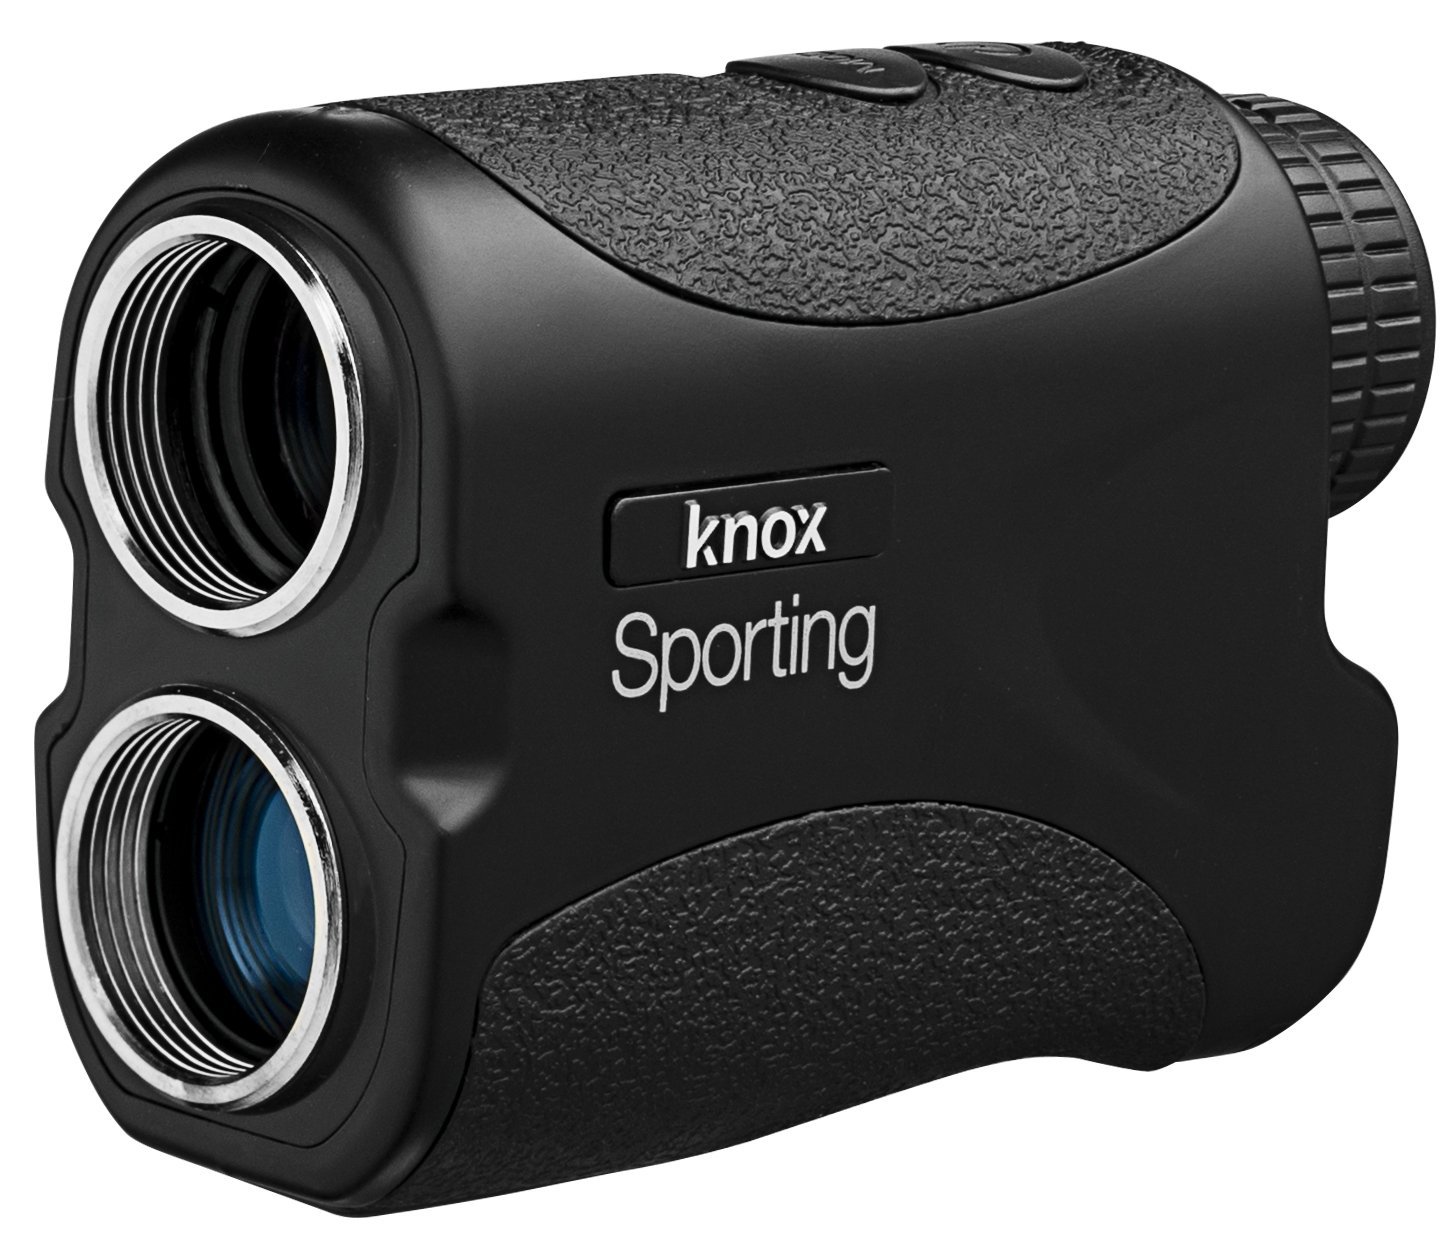 Knox Sporting Golf Laser Range Finders with Slope